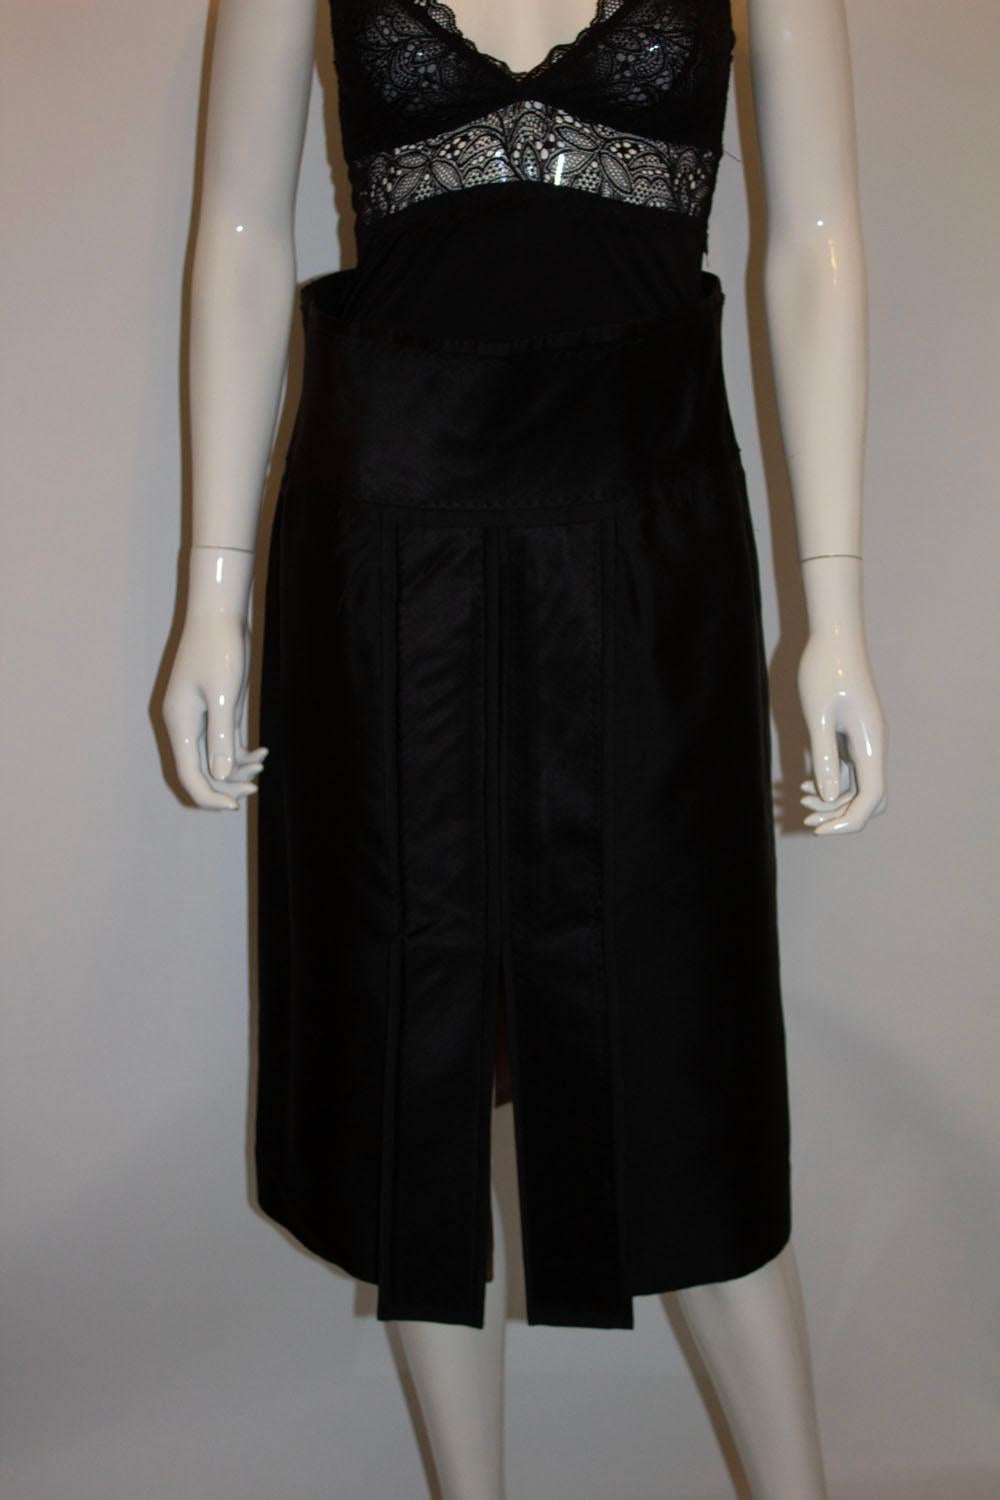 A stunning  vintage black silk skirt by Amanda Wakeley , main line. The skirt has wonderful tailoring and stitch detail, and is fully lined in silk. It has a back central zip and 12 1/2 '' slit at the front. 
UK size 10, measurements. waist 29'',